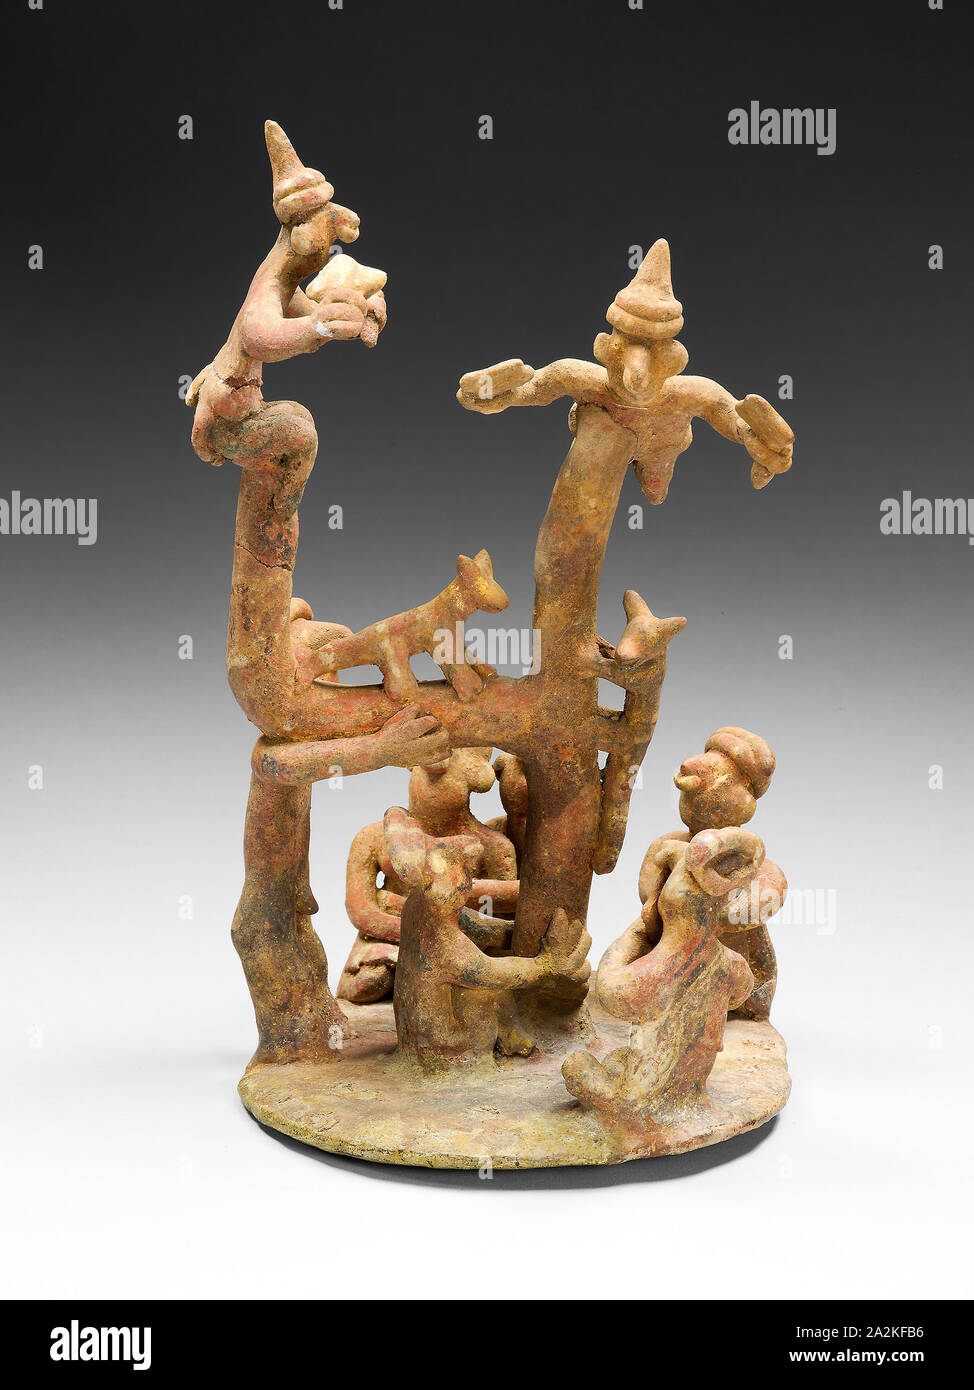 Model of a Tree-Climbing Ritual, A.D. 100/800, Nayarit, Ixtlán del Río, Nayarit, Mexico, Nayarit state, Ceramic and pigment, H. 22.8 cm (9 in Stock Photo